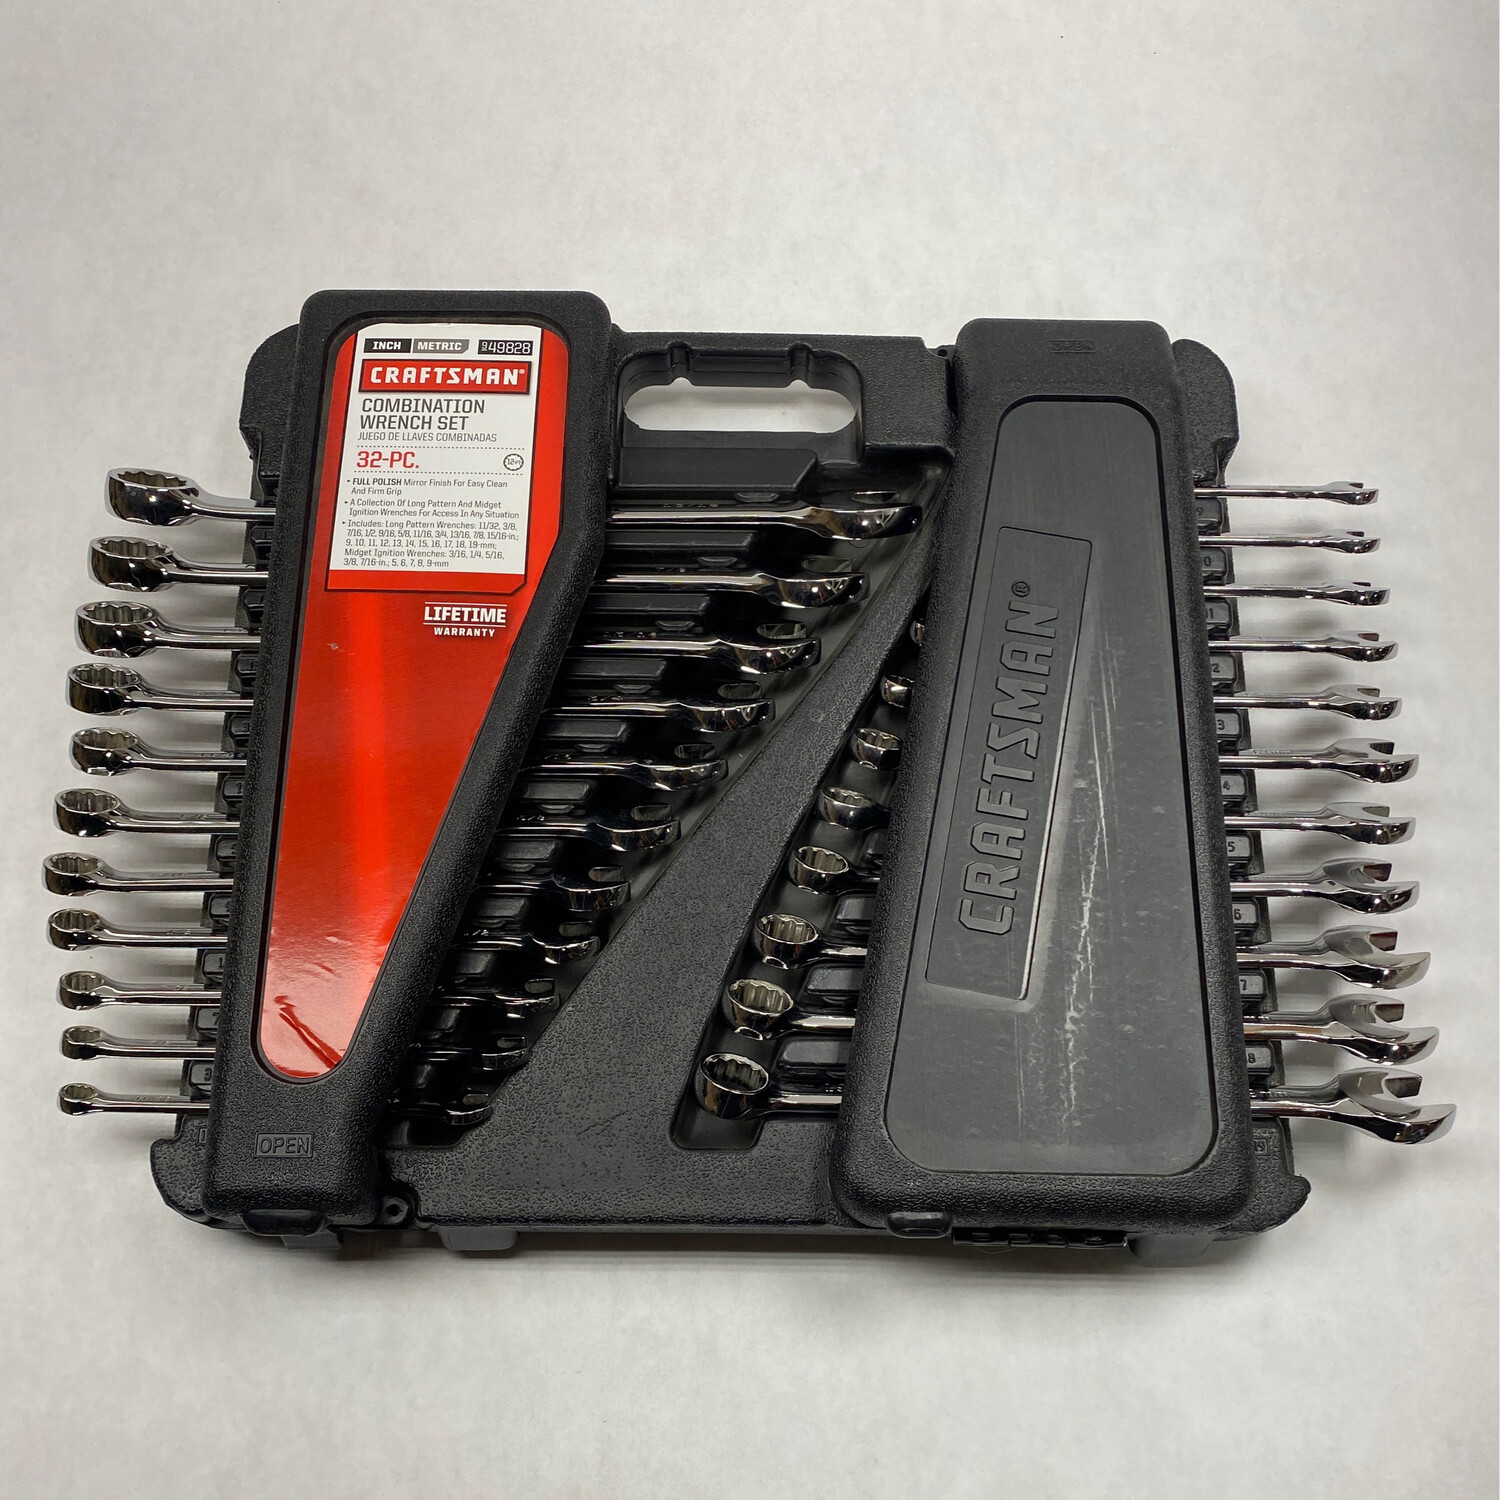 Craftsman 32pc. Combination Wrench Set, 49828